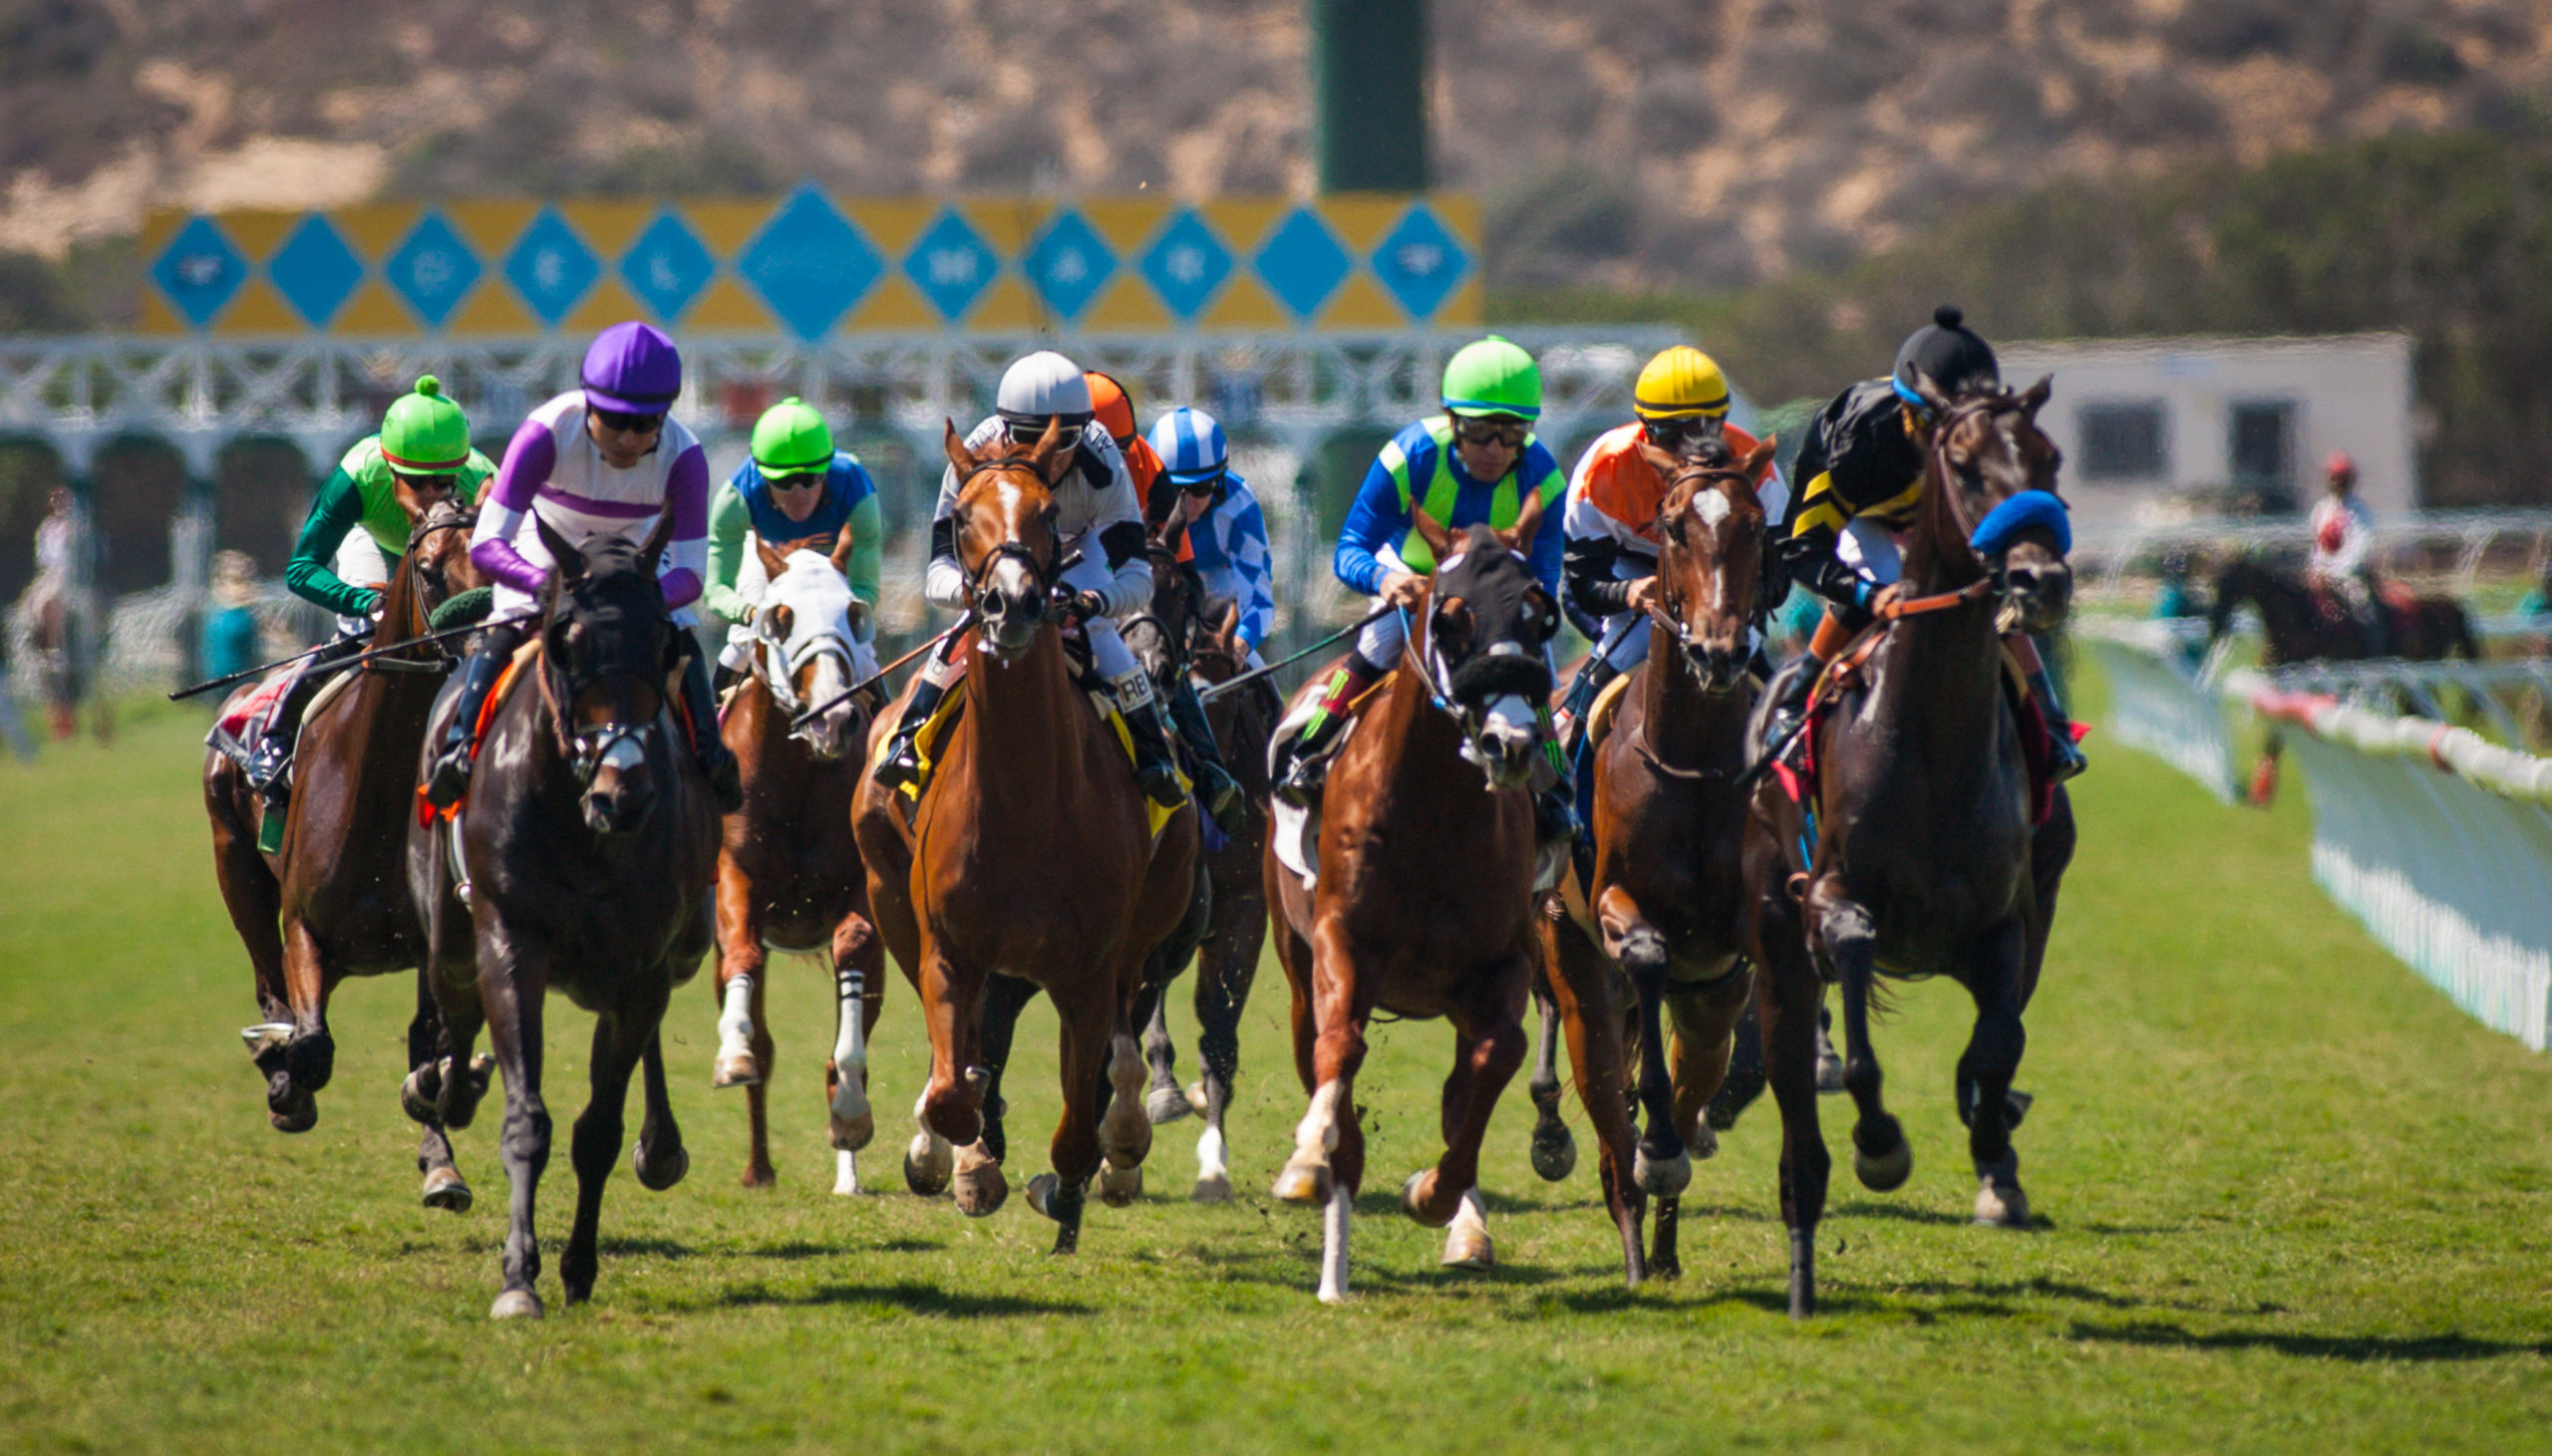 Head to Del Mar for a season of racing, with highlights including the renowned Breeders' Cup and Turf Club Sundays. 